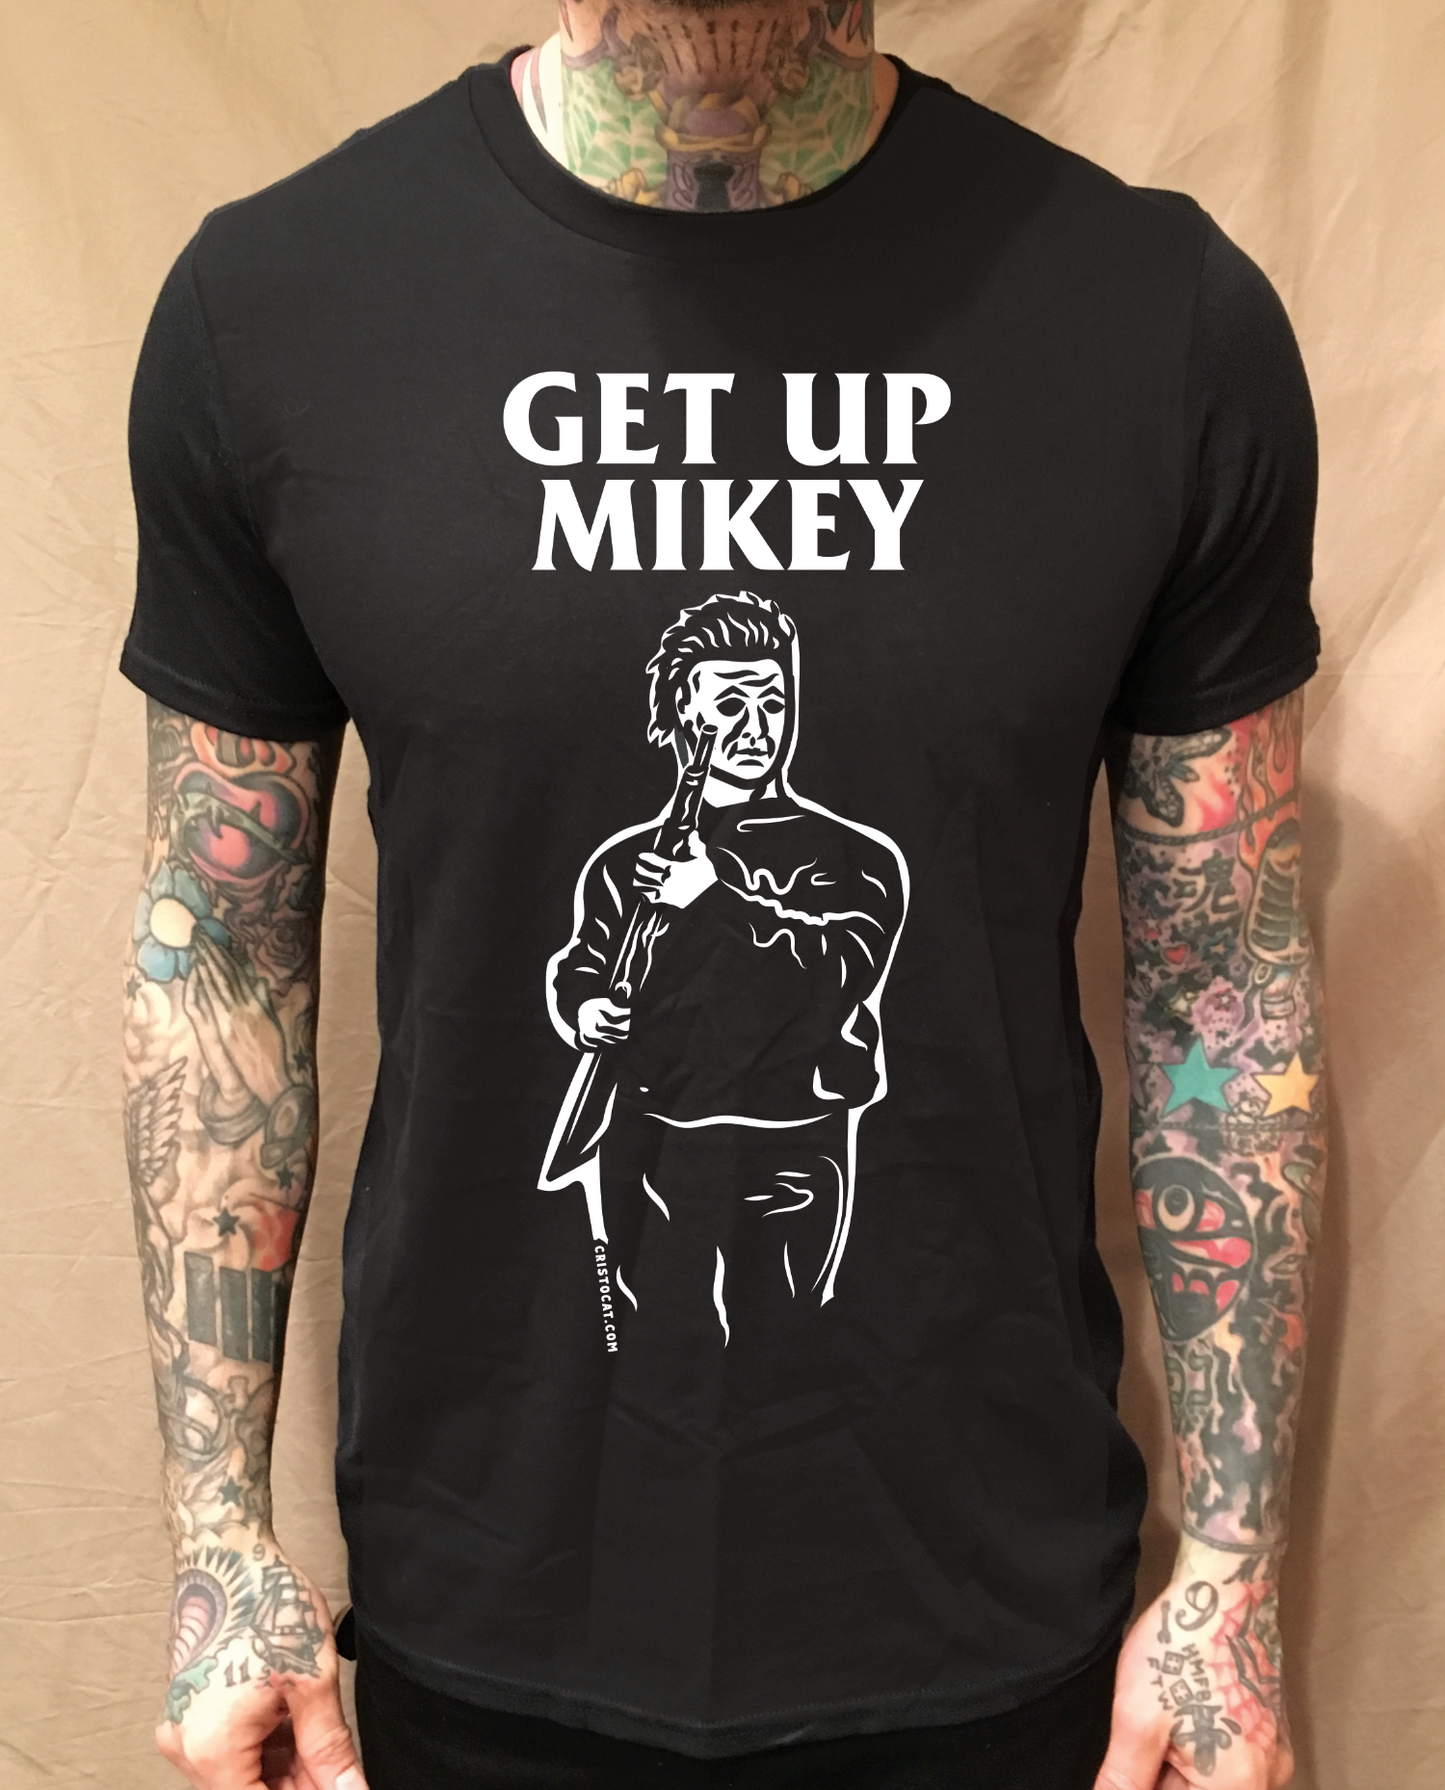 GET UP MIKEY BLACK TEE